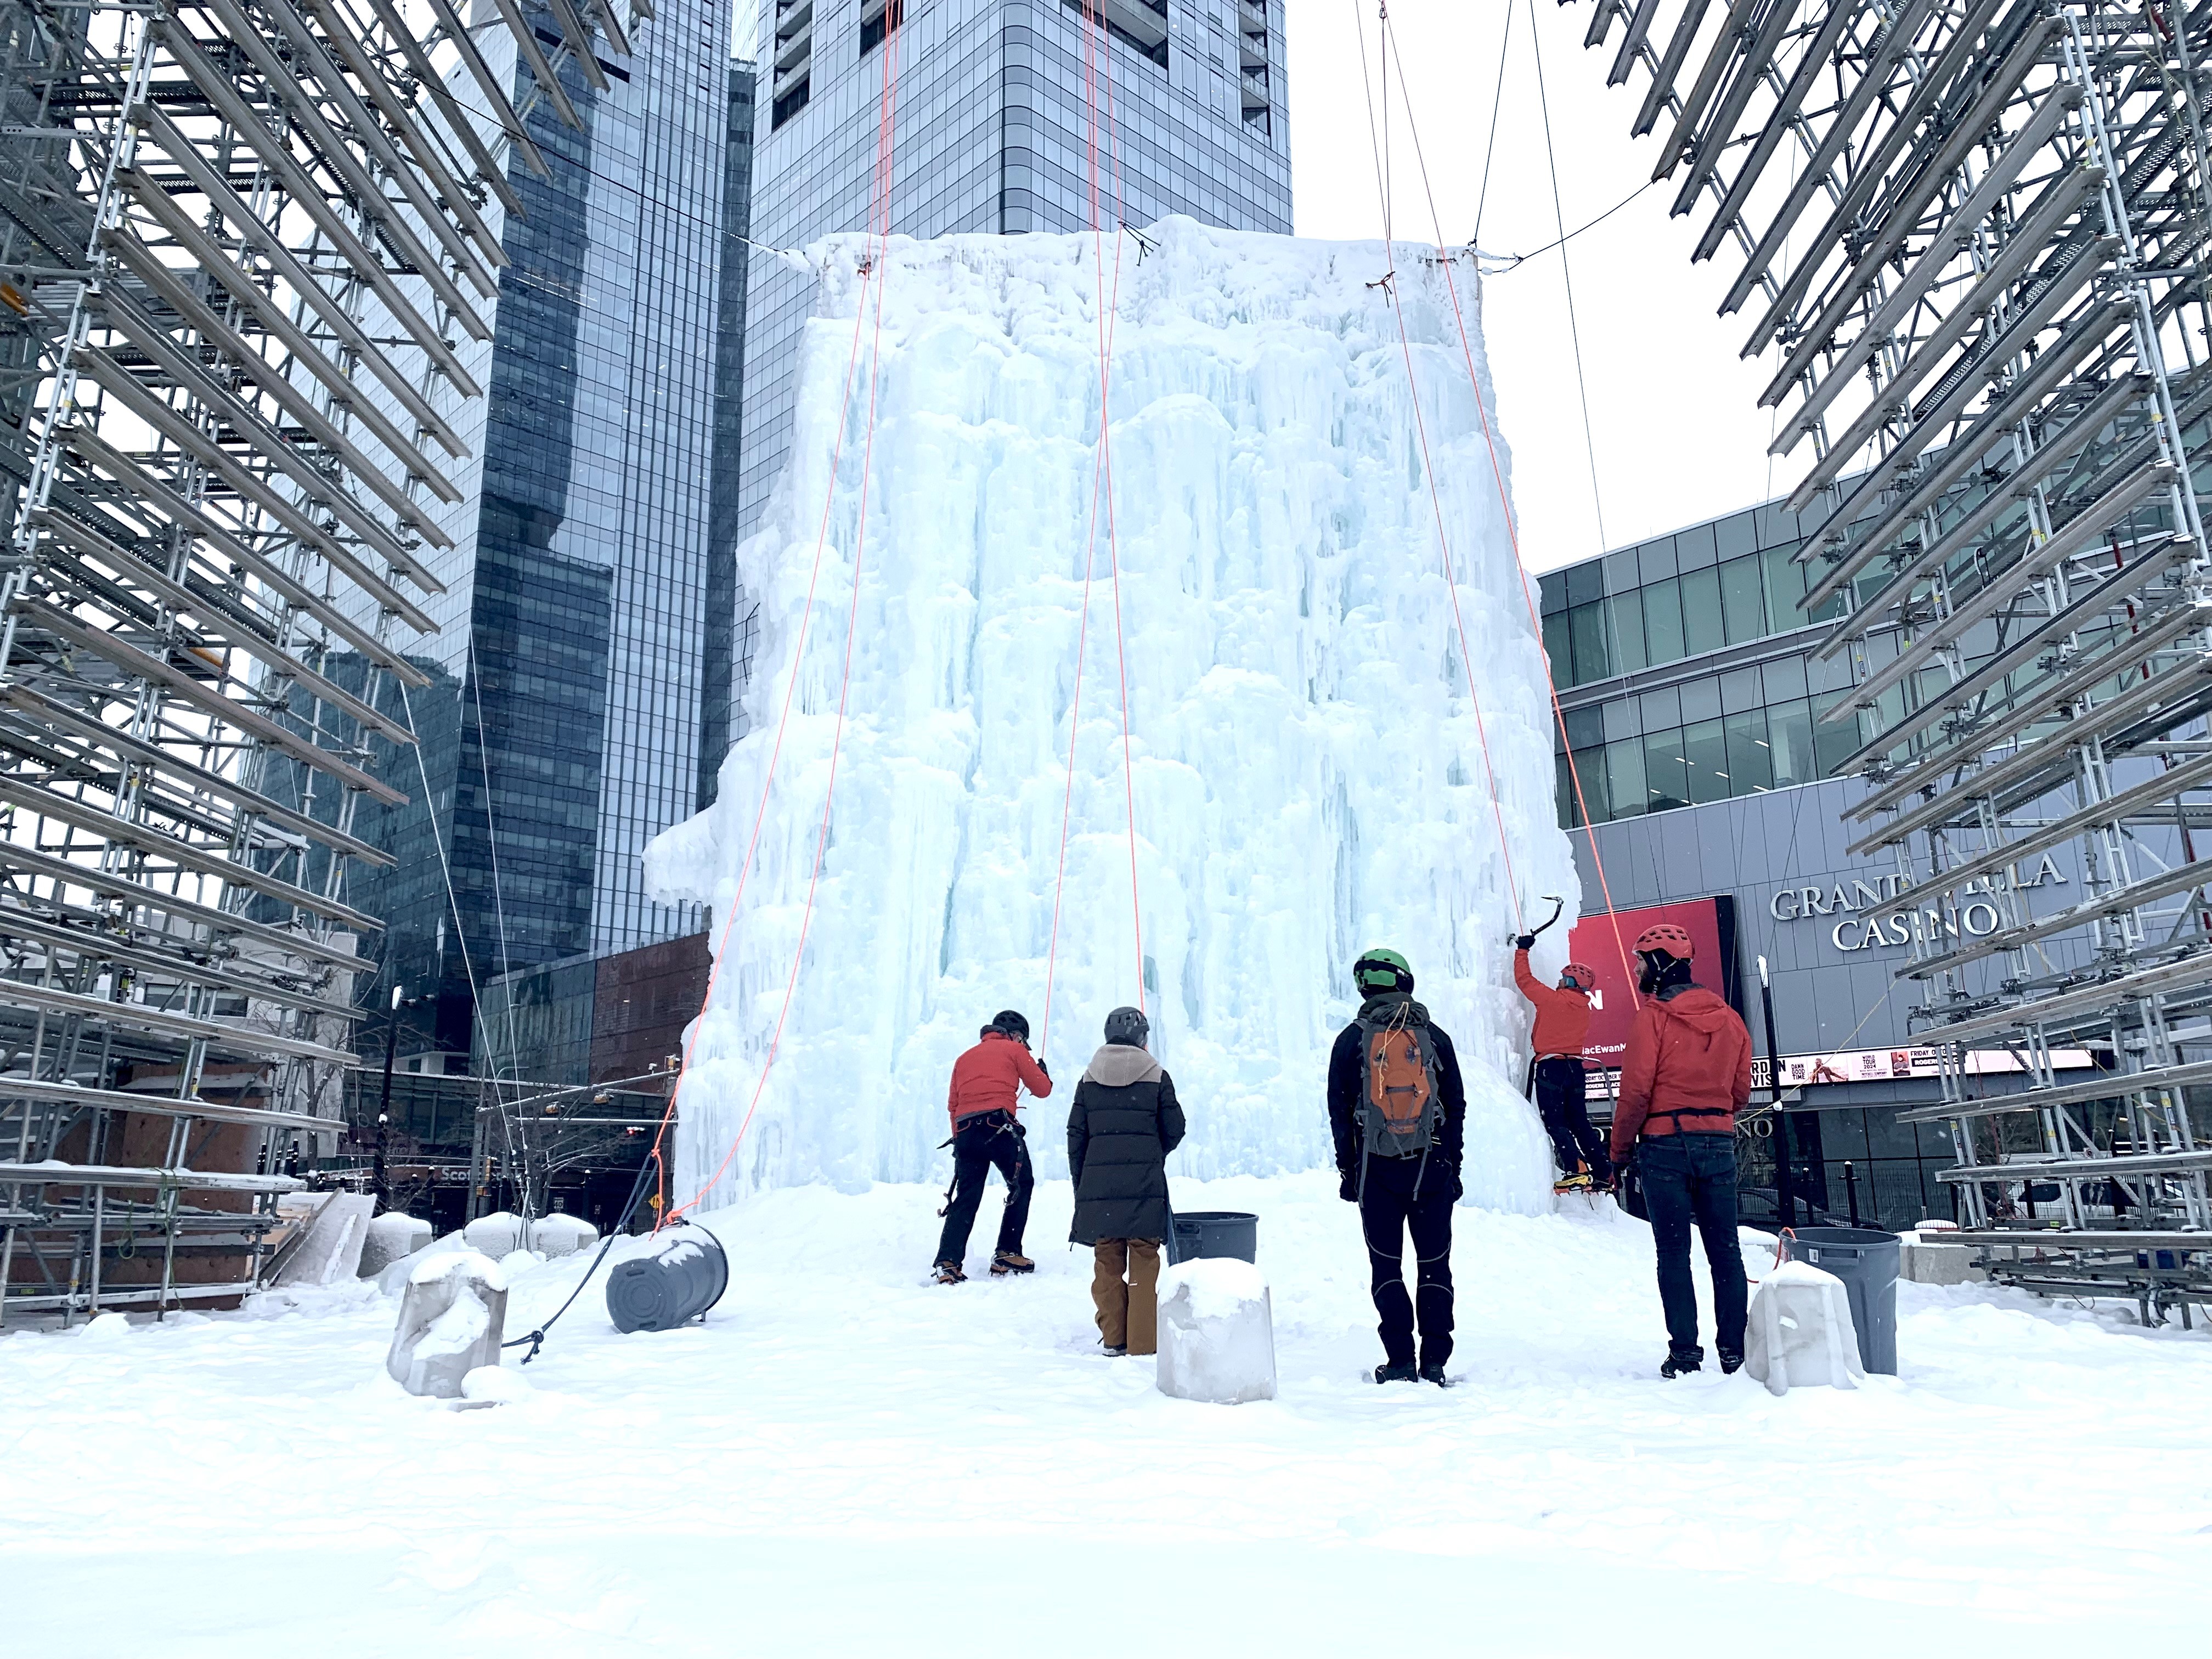 International athletes to compete in UIAA Ice Climbing World Championship and World Cup in Edmonton